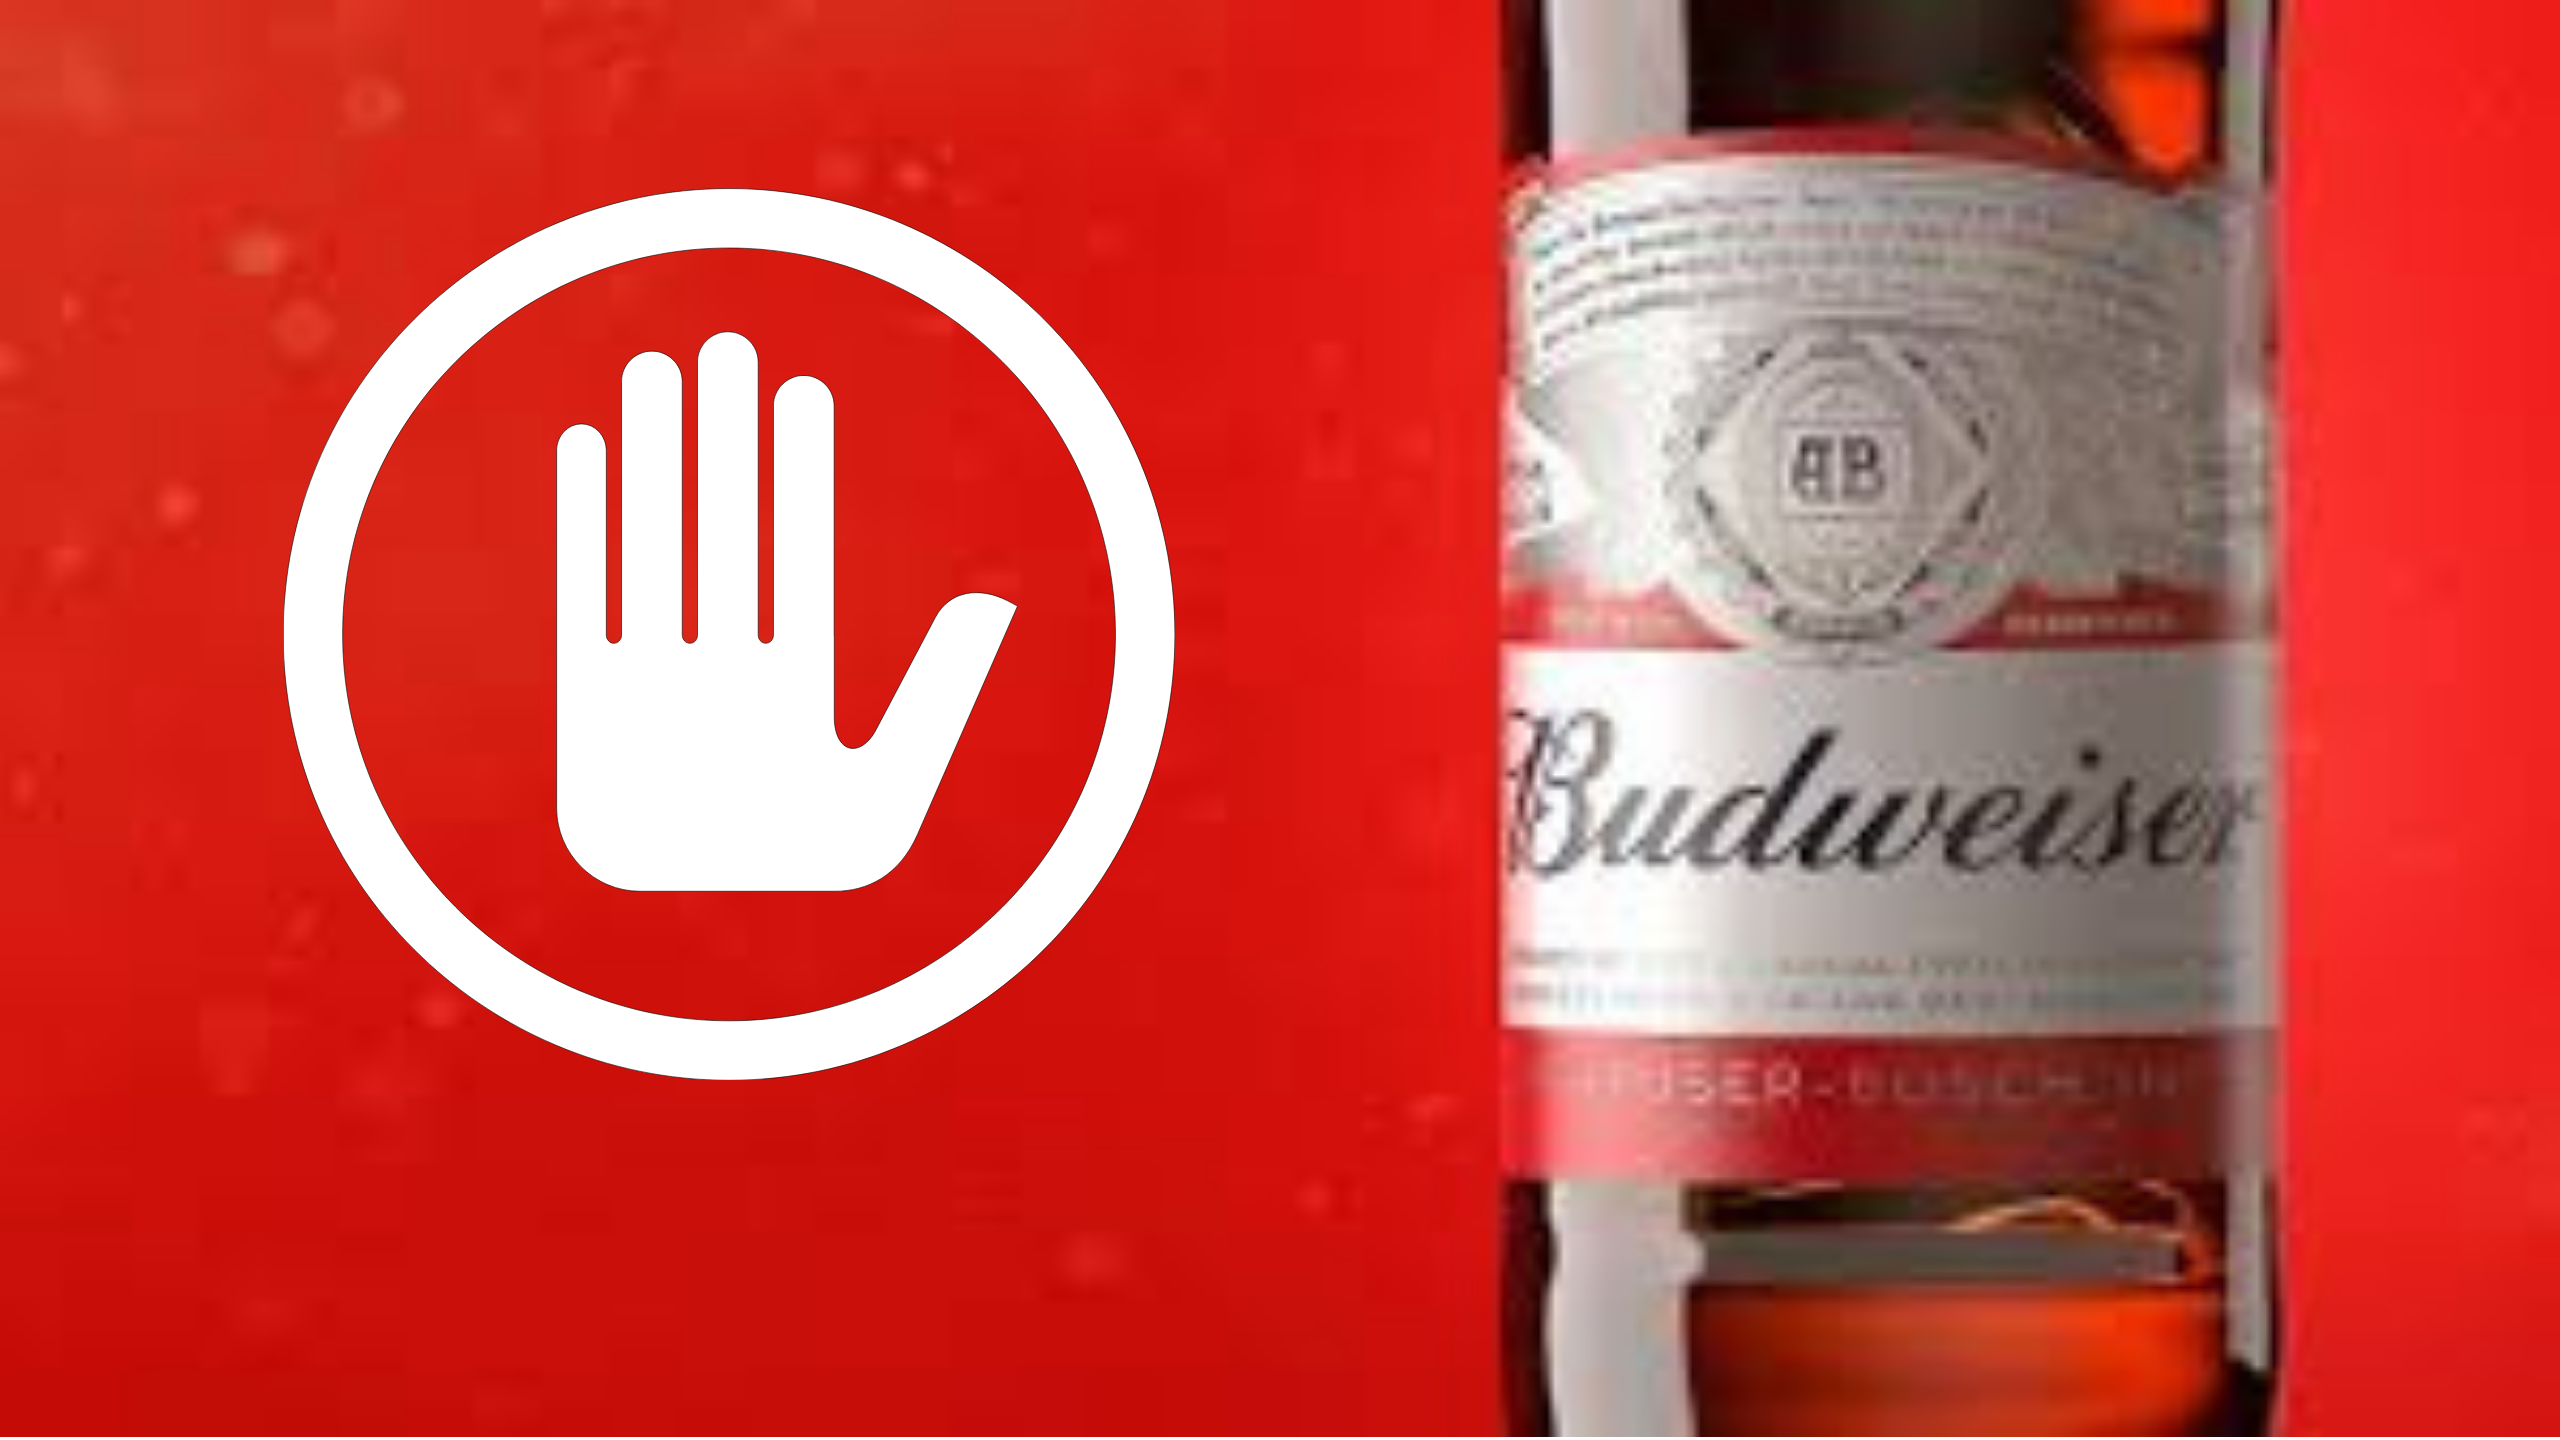 Lessons to learn from the Budweiser campaign - FAIL